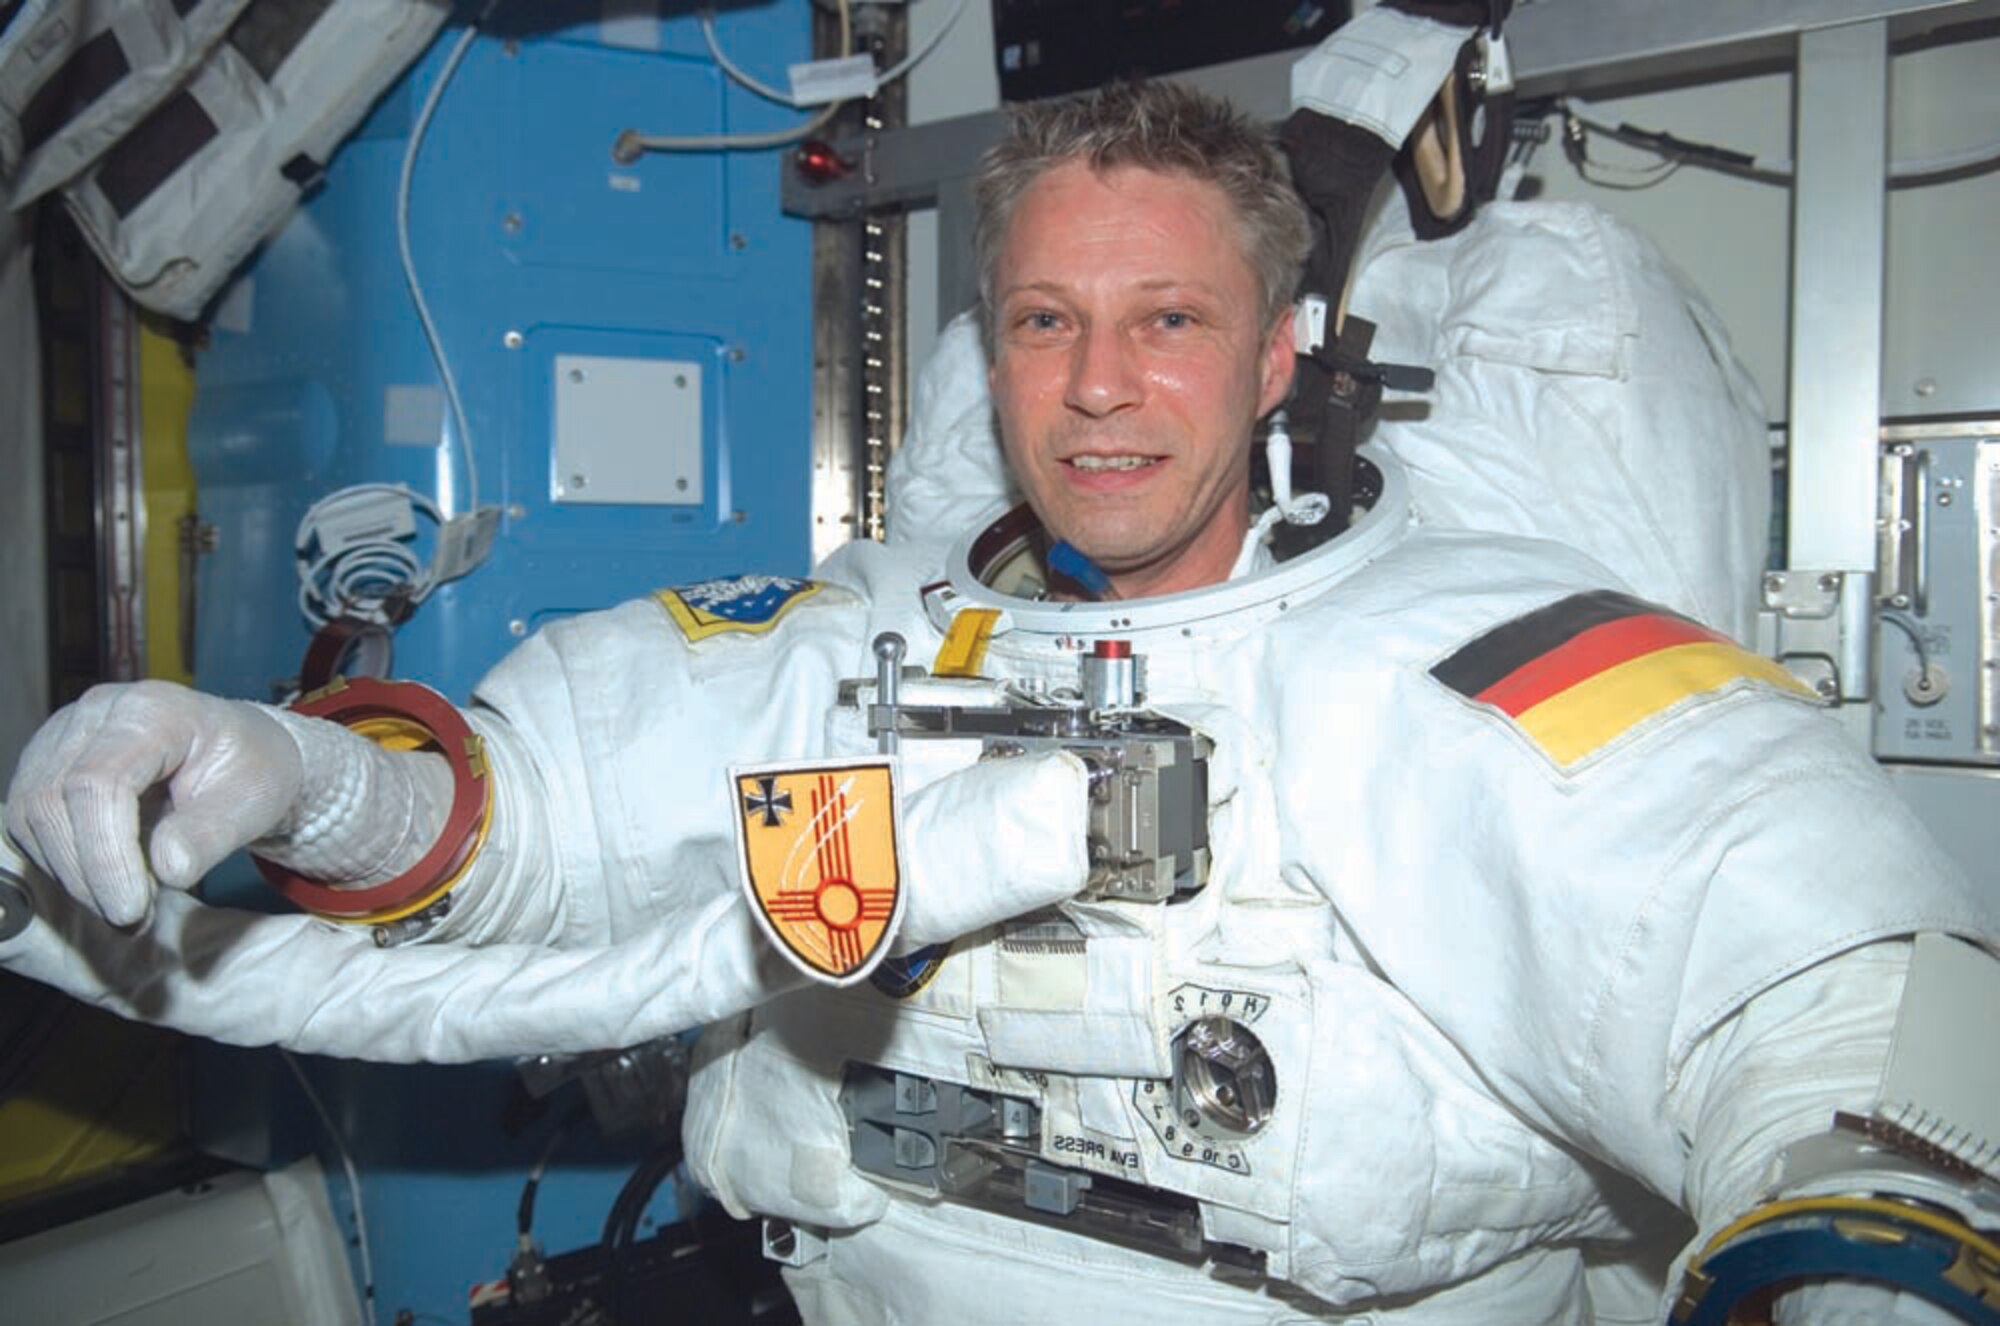 Thomas Reiter displays his German air force patch while aboard the Space Shuttle. He is currently on-board the International Space Station.